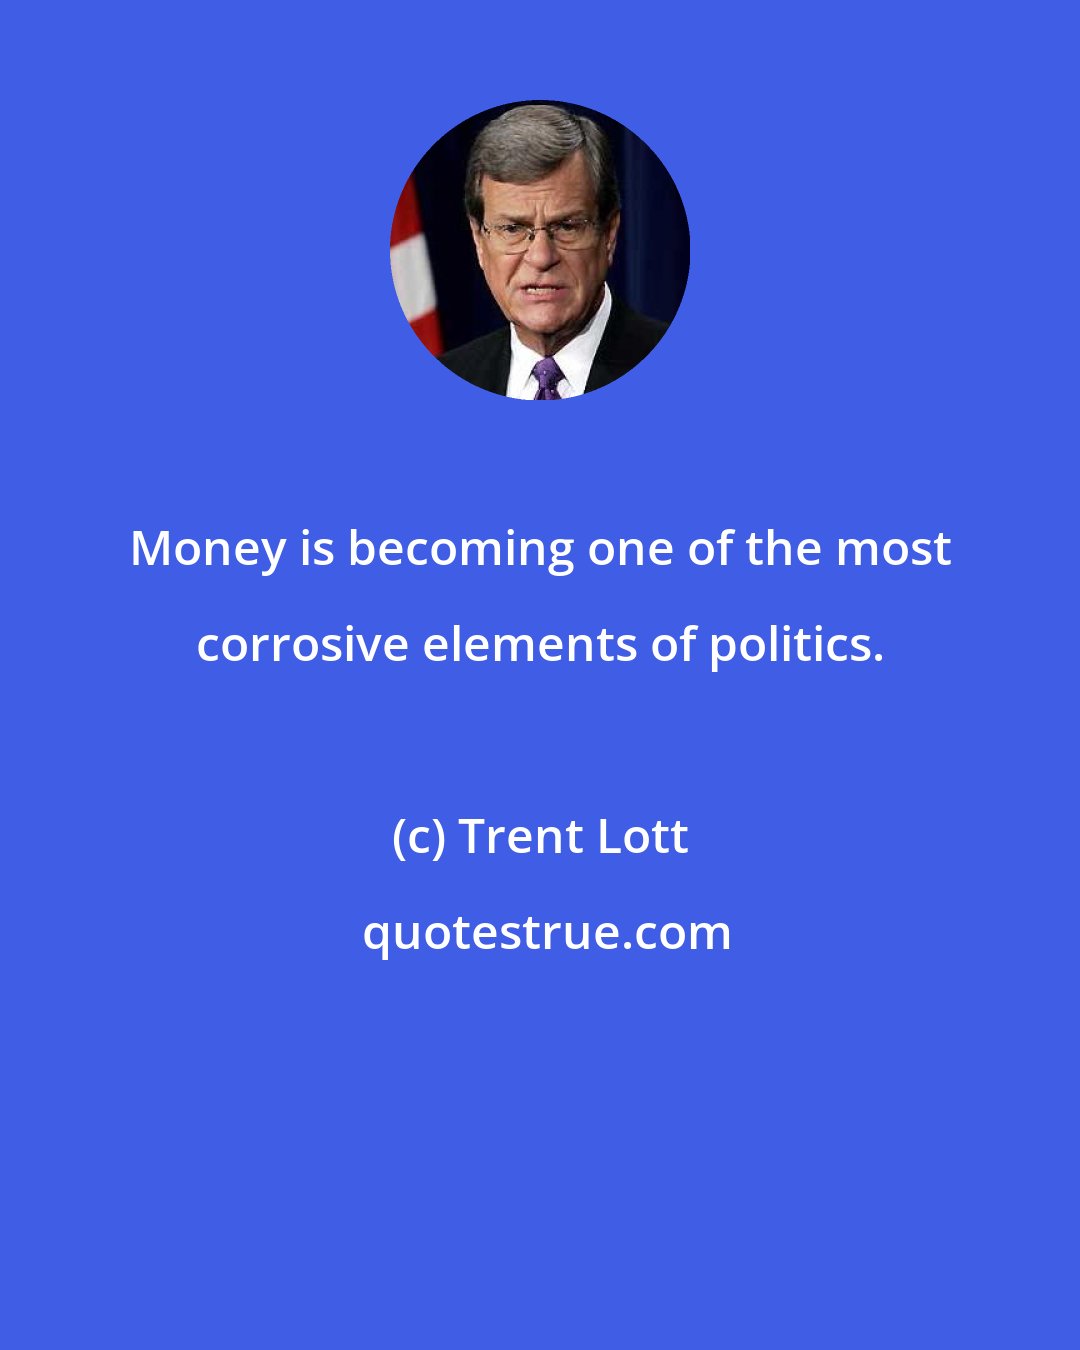 Trent Lott: Money is becoming one of the most corrosive elements of politics.